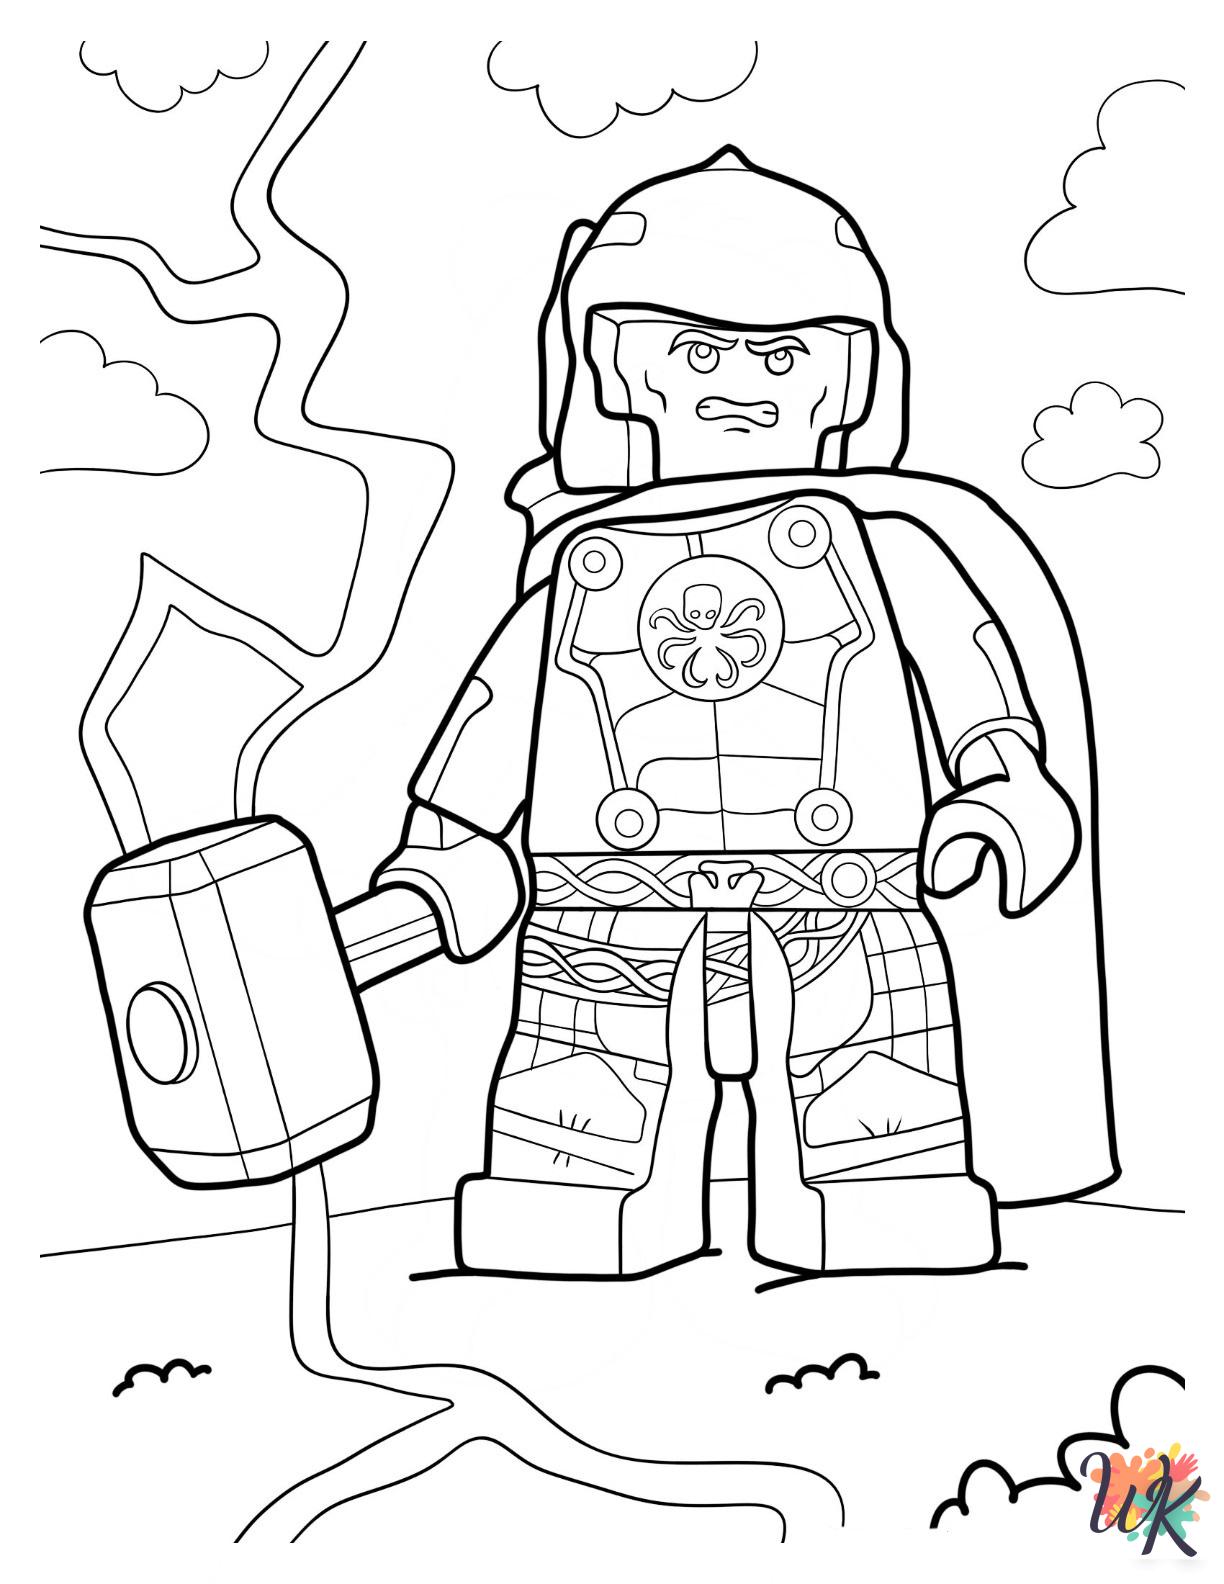 Lego Avengers coloring pages for adults easy